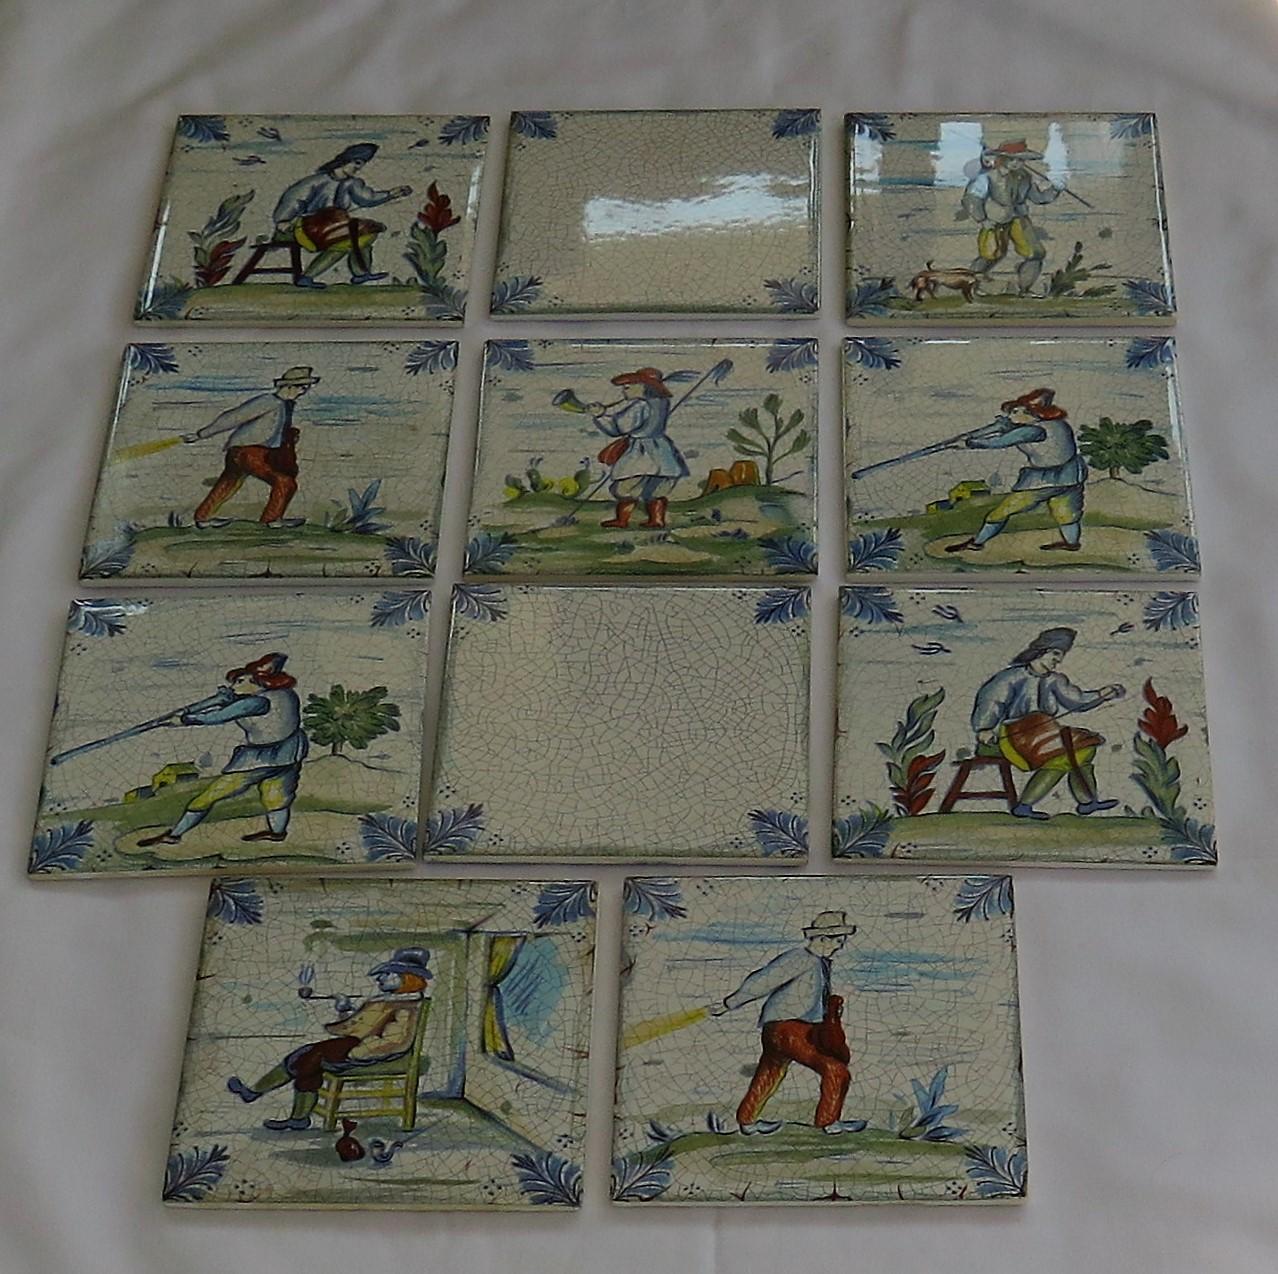 Folk Art Set of Eleven Ceramic Wall Tiles by Servais of Germany Set 2, circa 1950